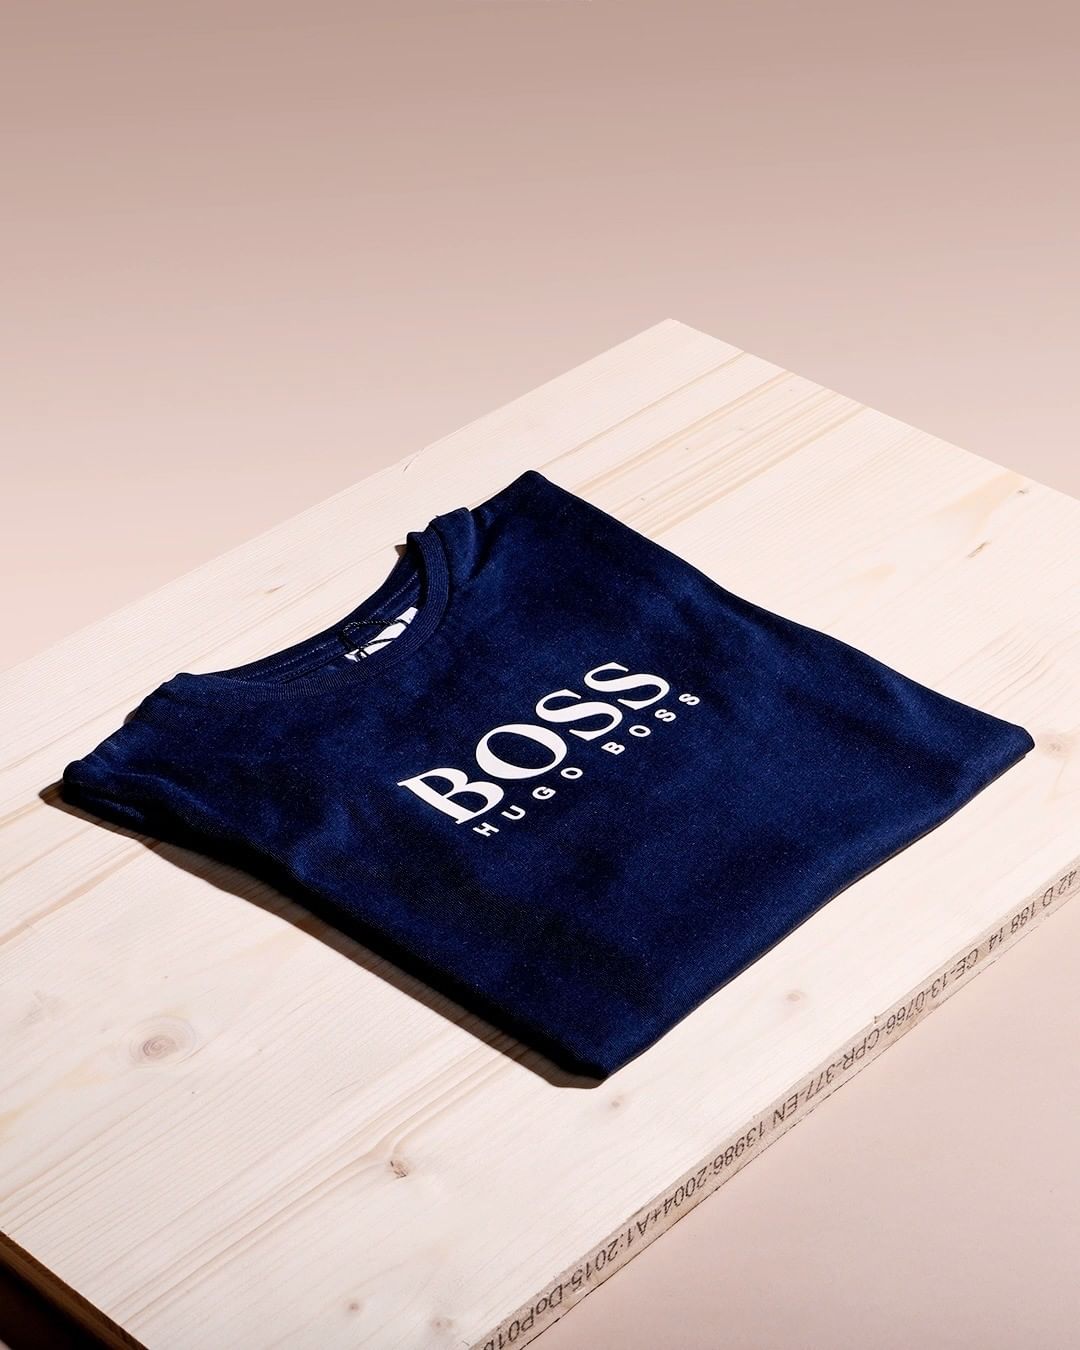 BAMBINIFASHION.COM - Stylish, classy and simply fabulous - this all is about the t-shirts from Hugo Boss! Discover the newest collection now! #hugobosskids #hugoboss #bambinifashion